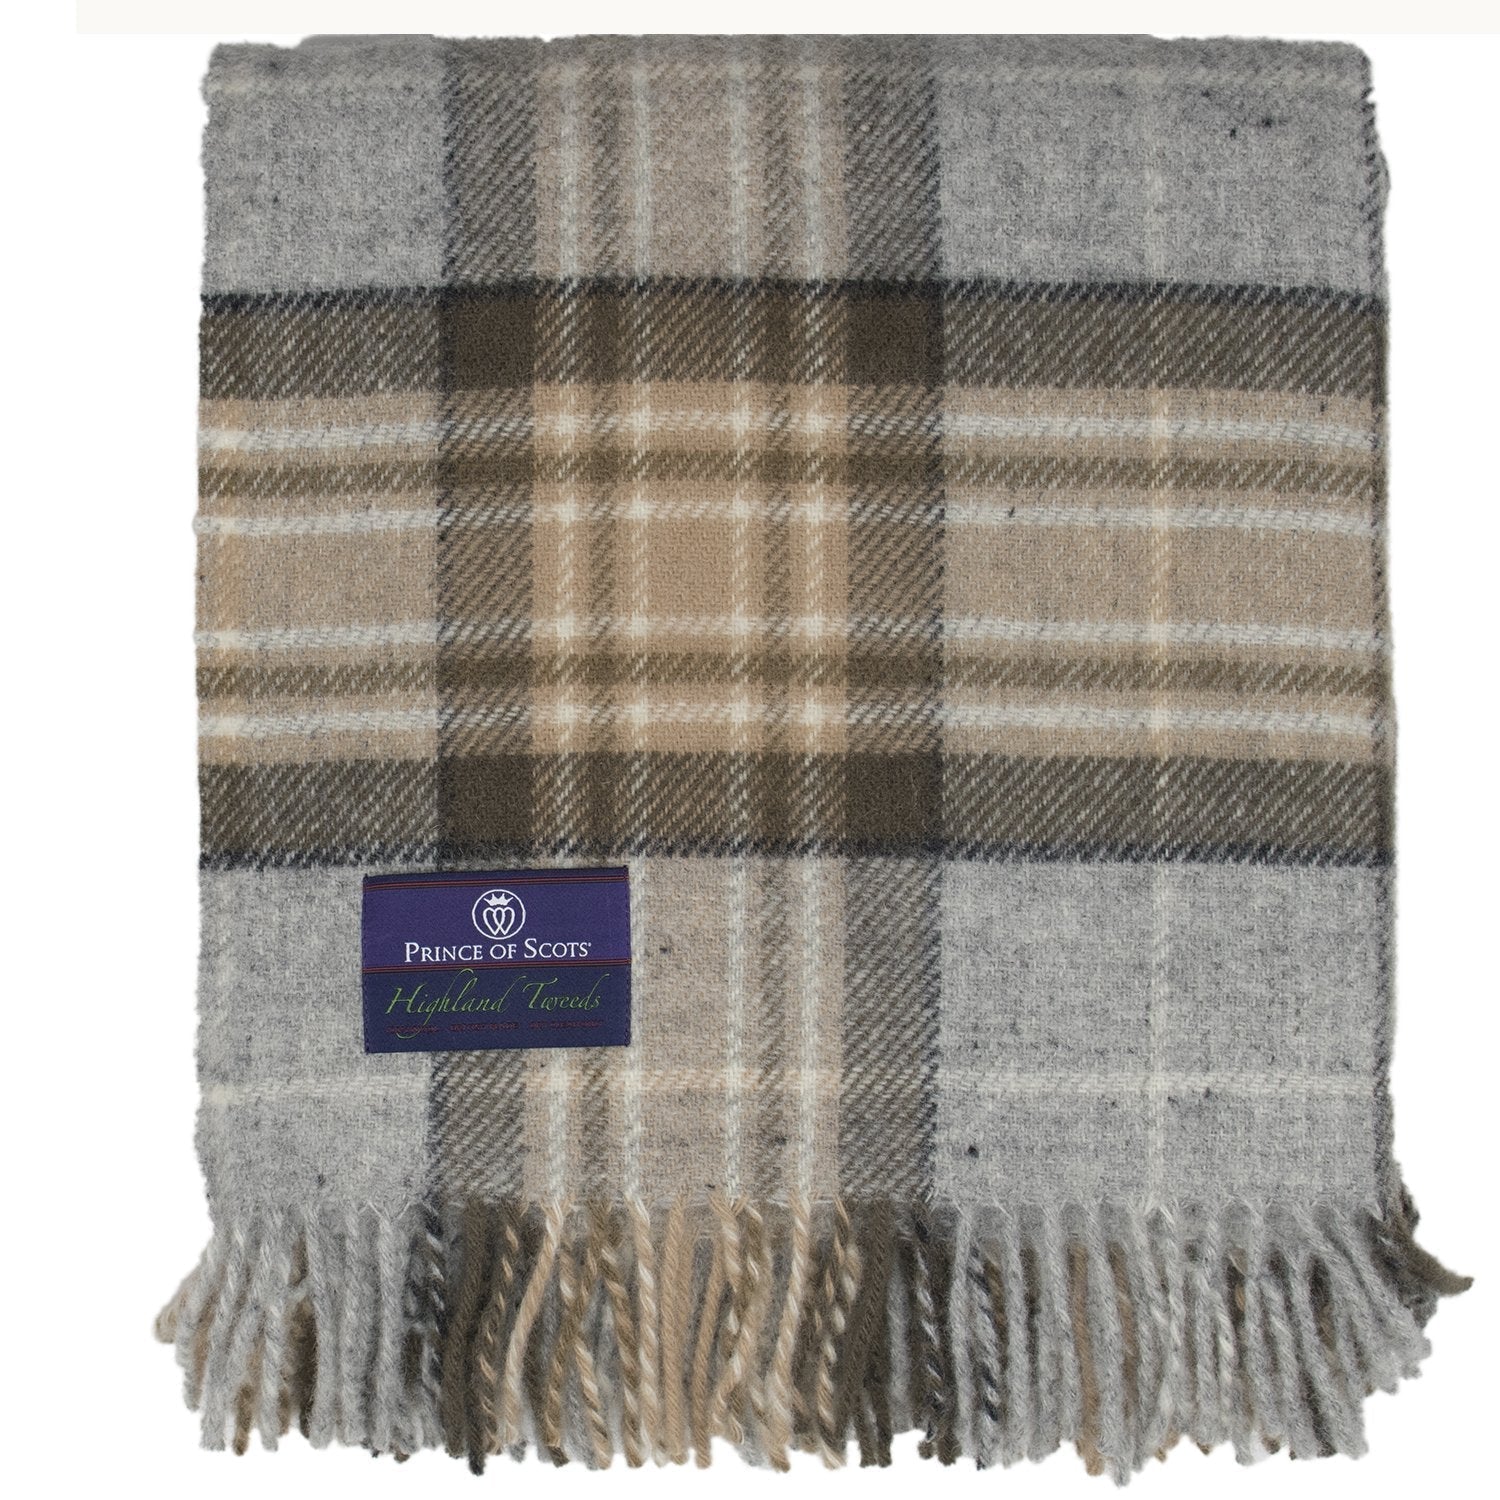 Prince of Scots Highland Tweed Pure New Wool Fluffy Throw ~ McKellar Tan Plaid ~-Throws and Blankets-Prince of Scots-00810032750251-K4050018-02-Prince of Scots